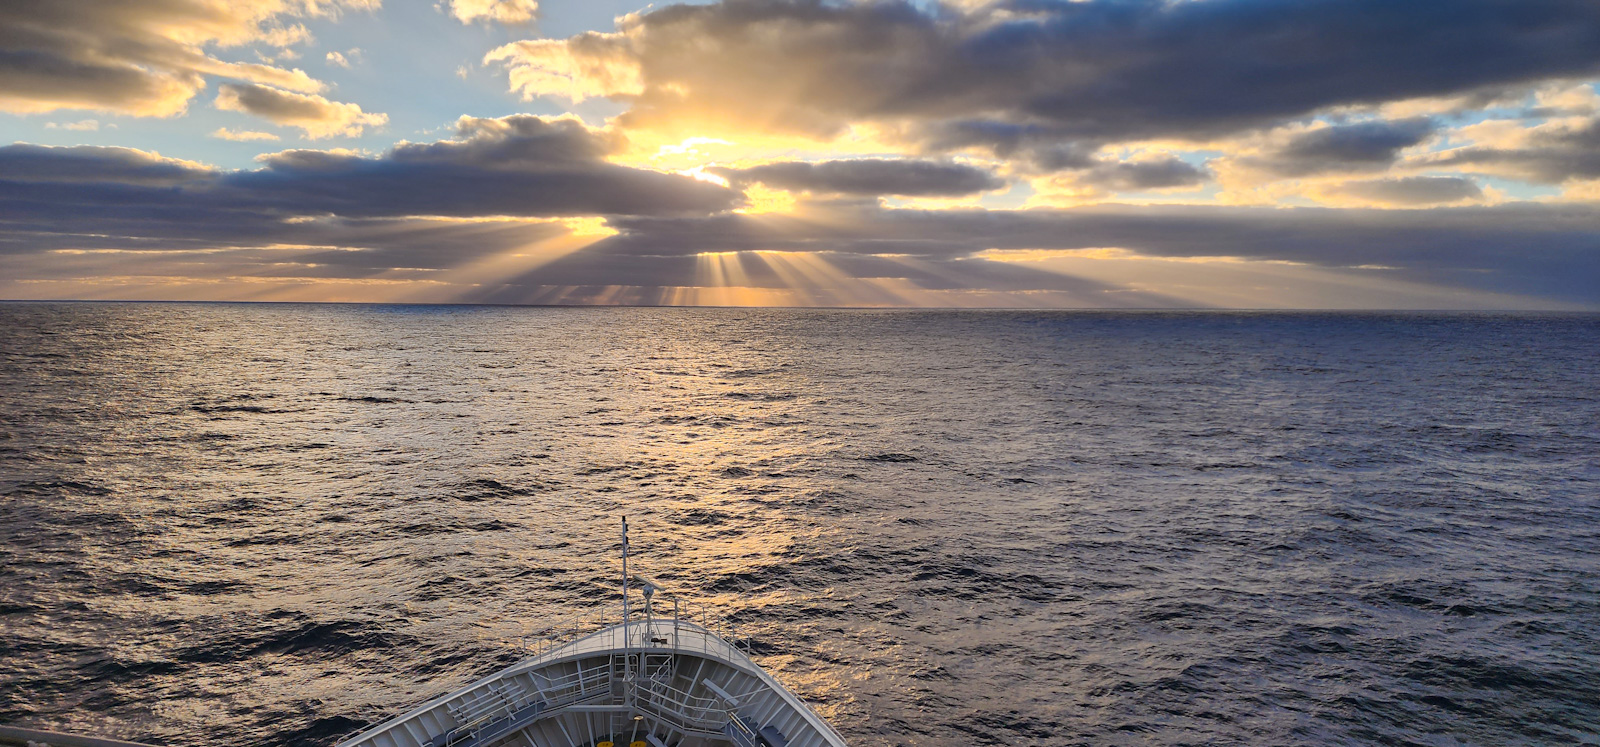 Everything You Need to Know about a Transatlantic Cruise